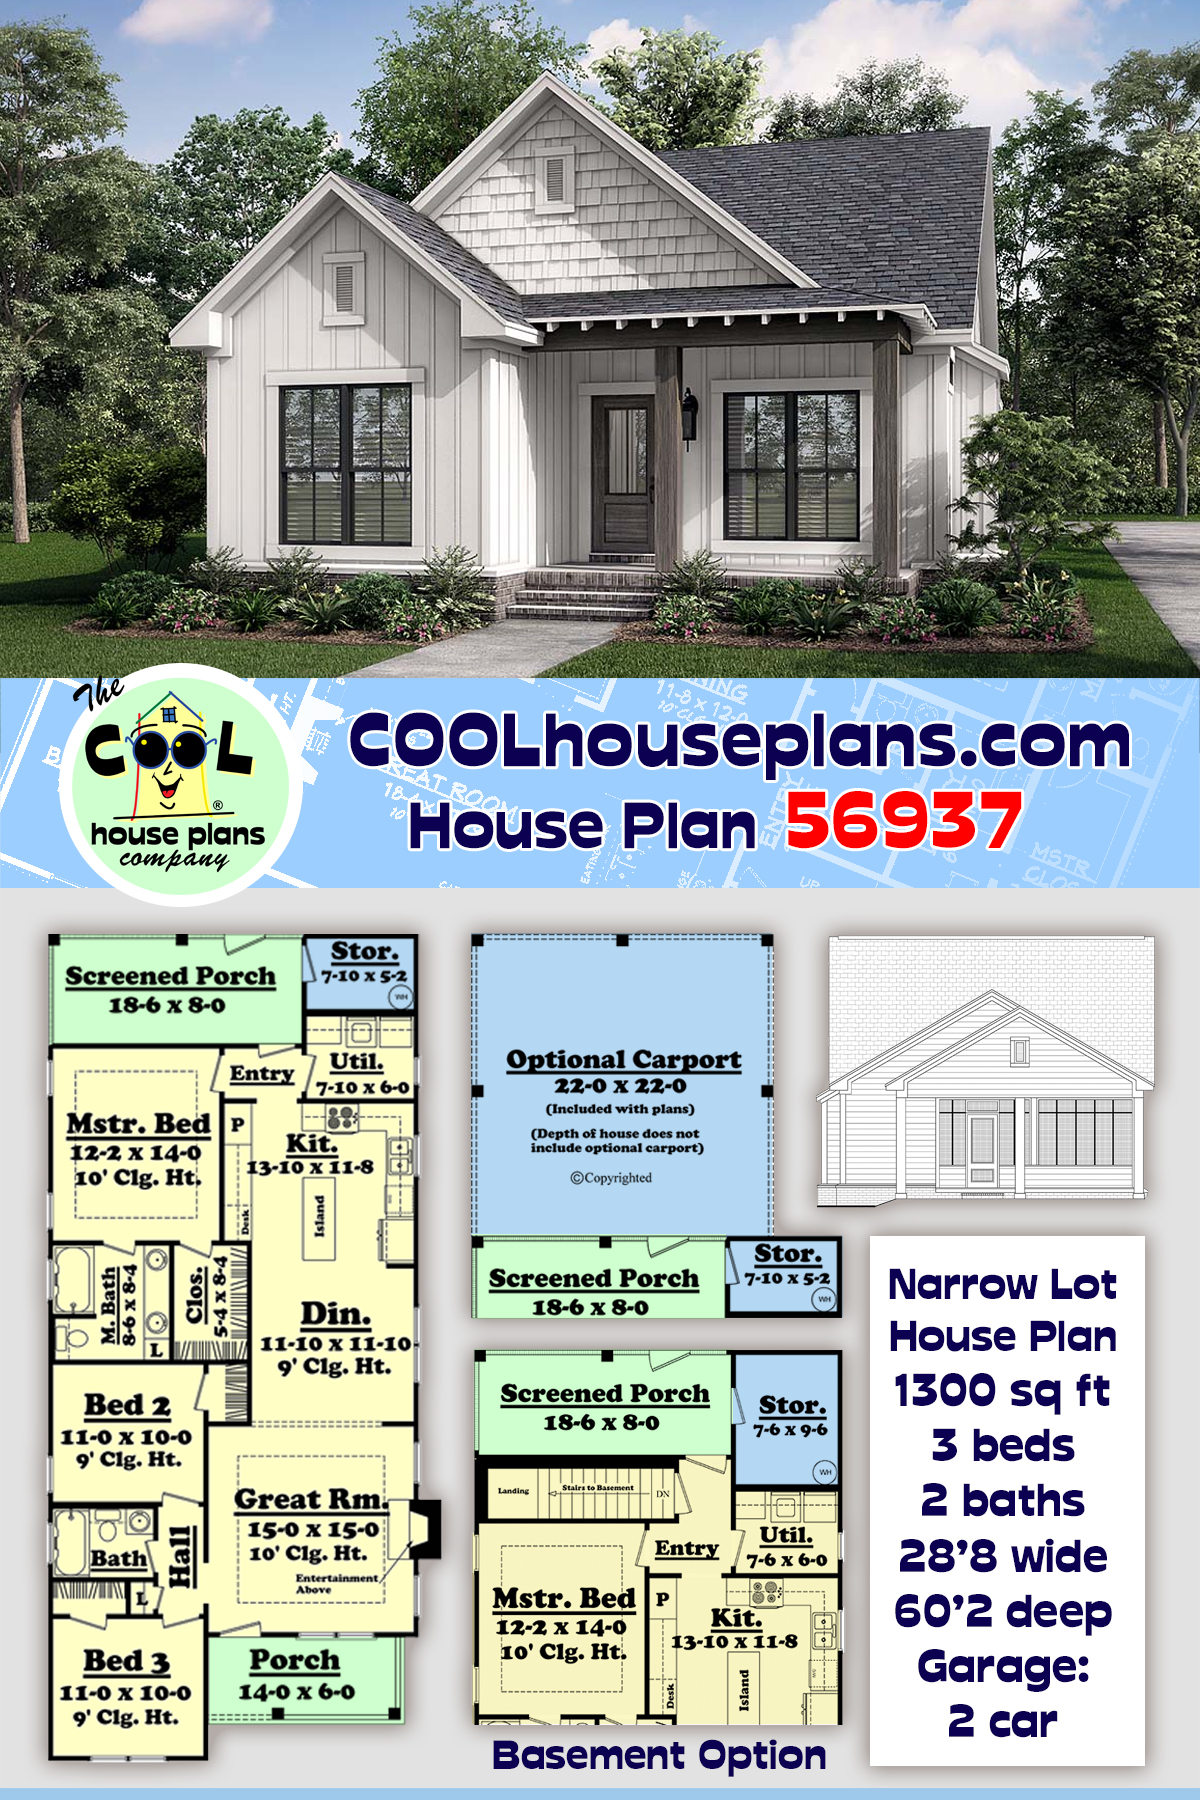 Cottage, Country, Southern, Traditional House Plan 56937 with 3 Beds, 2 Baths, 2 Car Garage